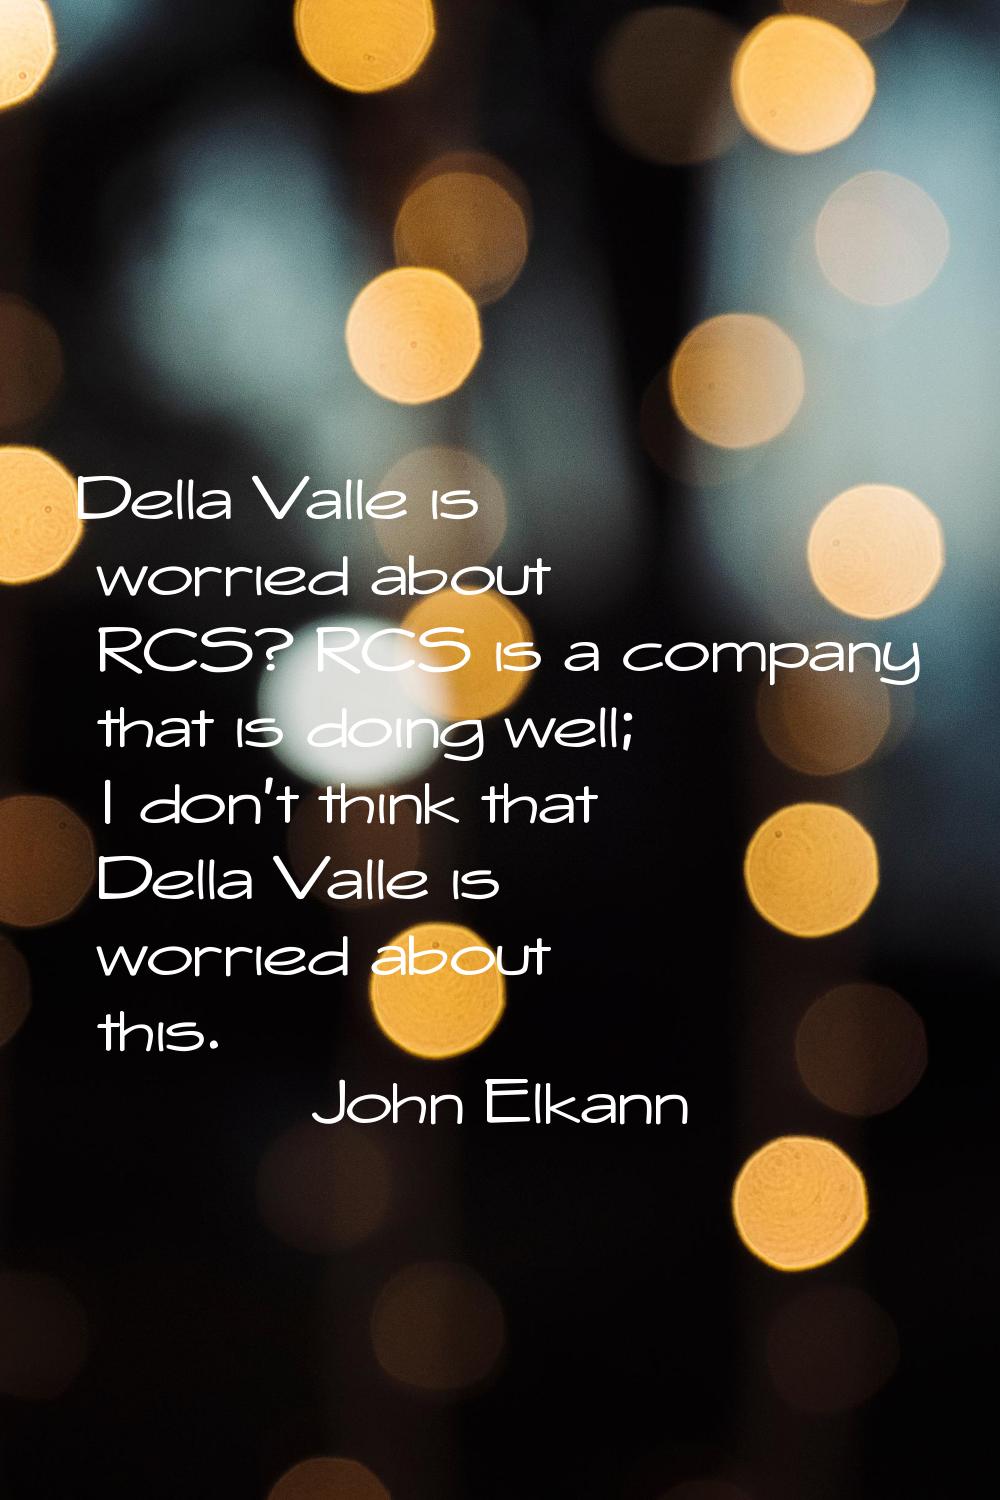 Della Valle is worried about RCS? RCS is a company that is doing well; I don't think that Della Val